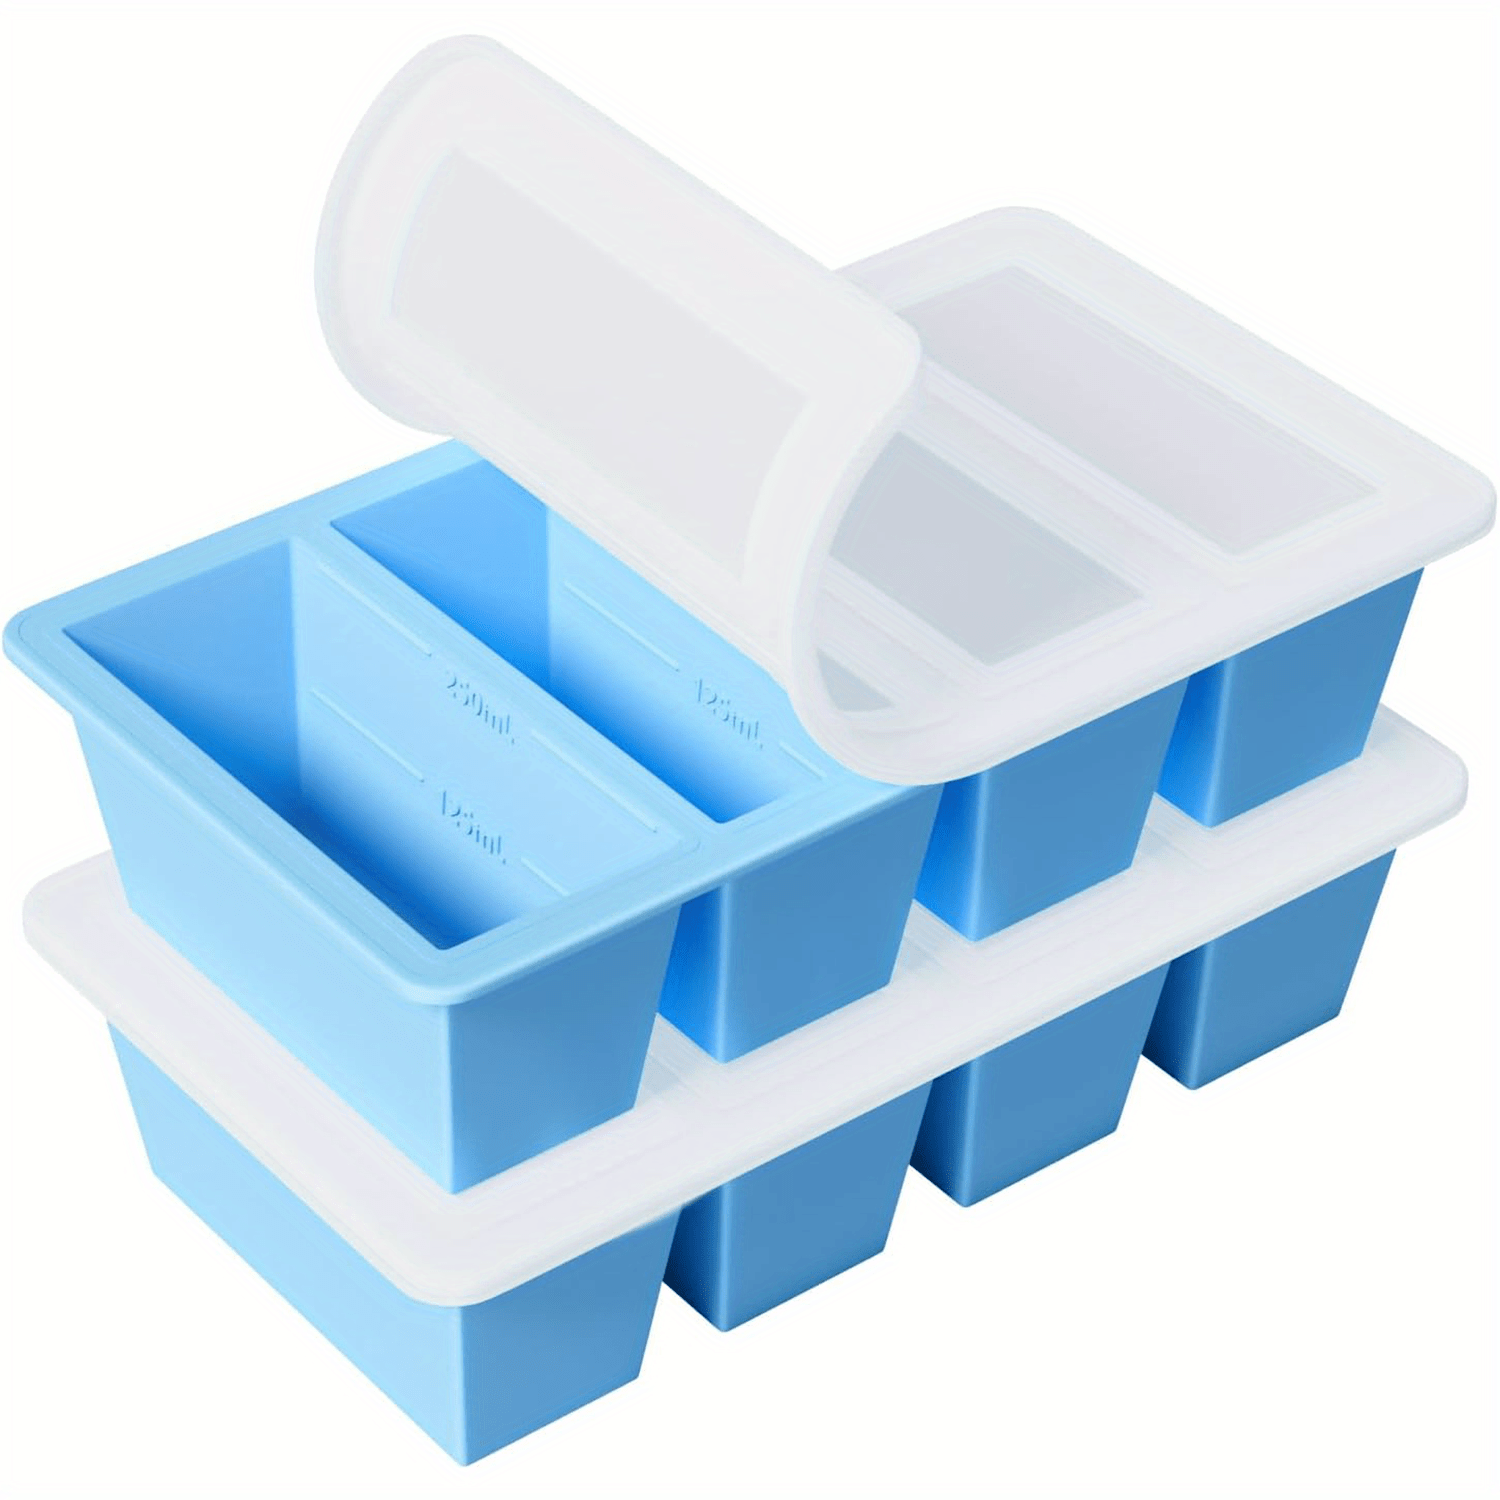 

2pcs Silicone Soup Freezer Trays With Lids, Water Blue - Perfect For Freezing Broth, Sauces, Kitchen Storage Accessories